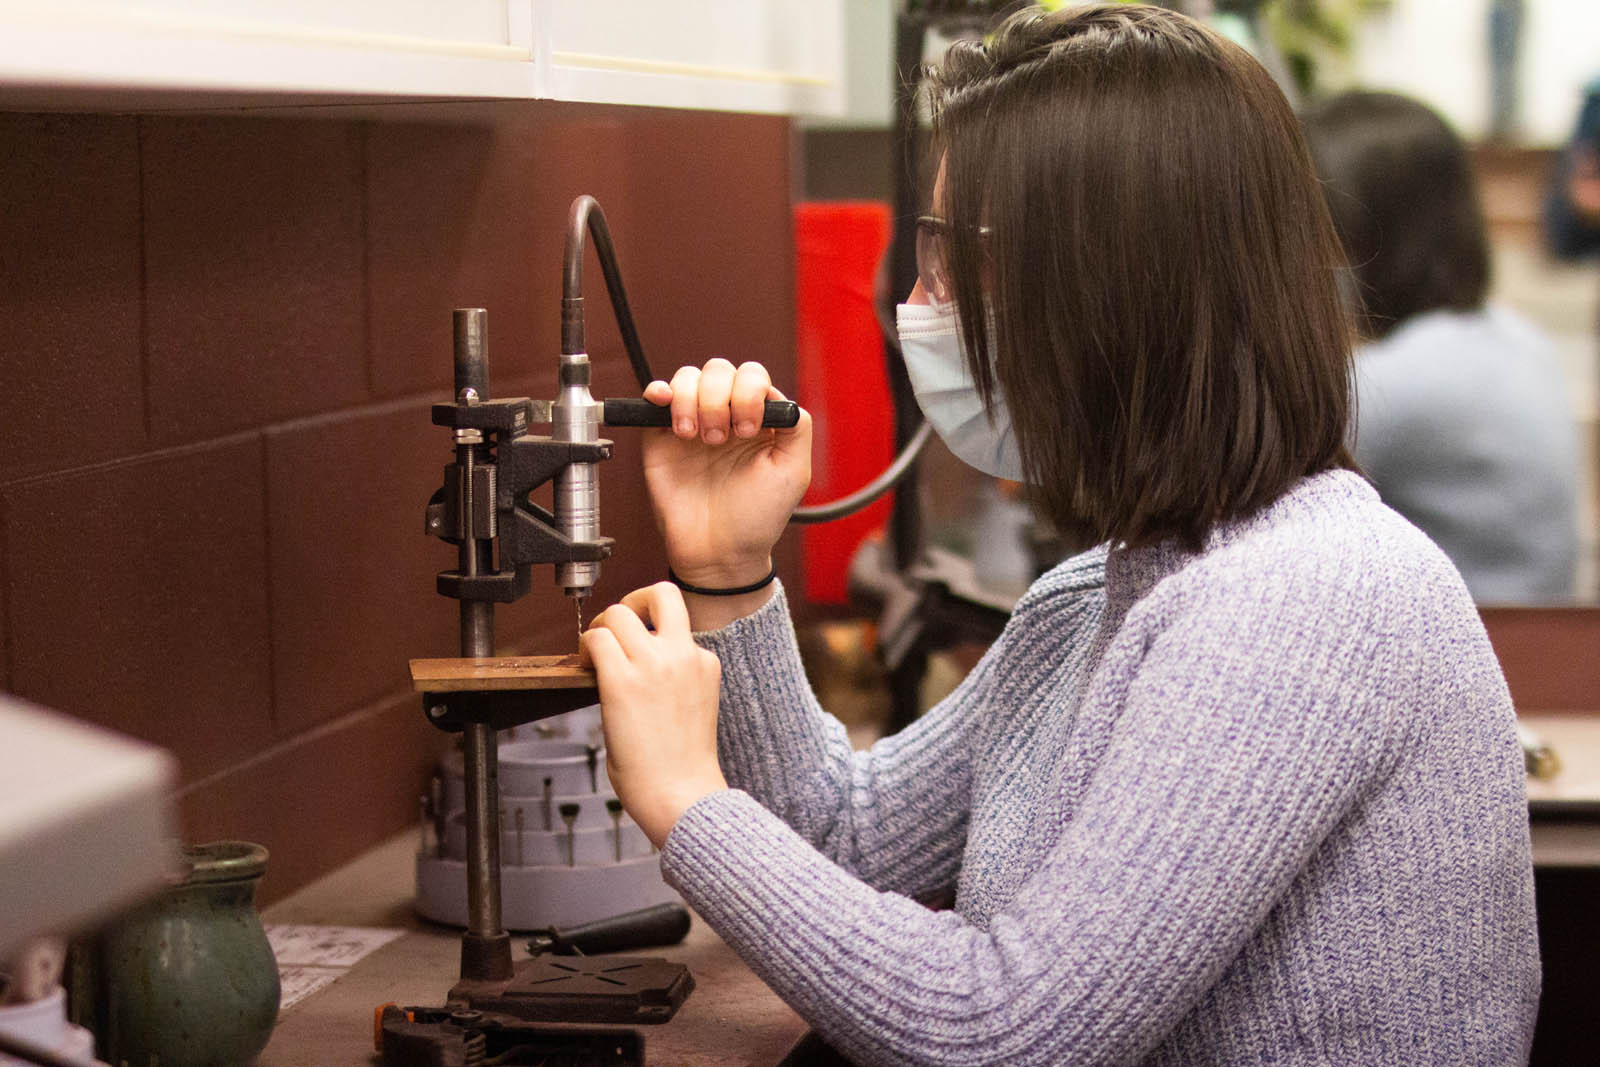 <strong>Emily Miner '21</strong> operates a press during a jewelry class taught by <strong>Miles Marshall ’21</strong>. Photo by <strong>John Le ’24</strong>